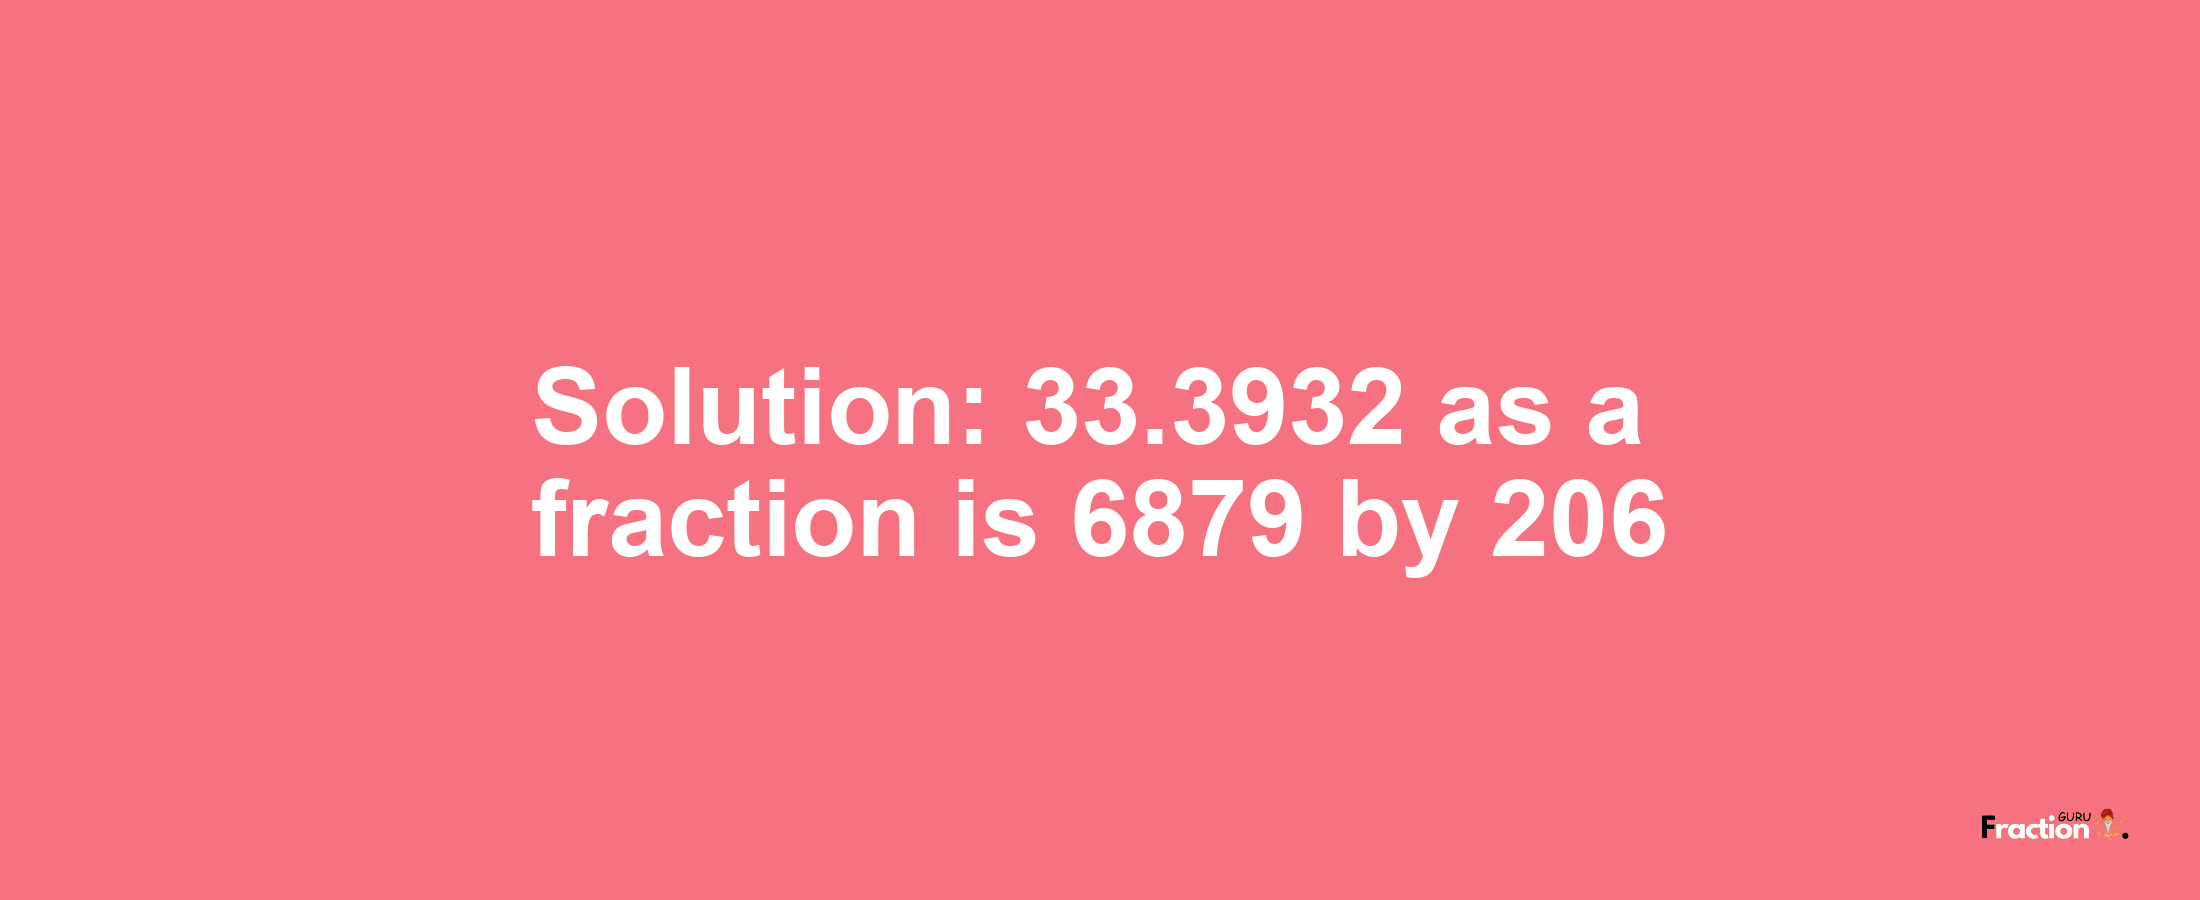 Solution:33.3932 as a fraction is 6879/206